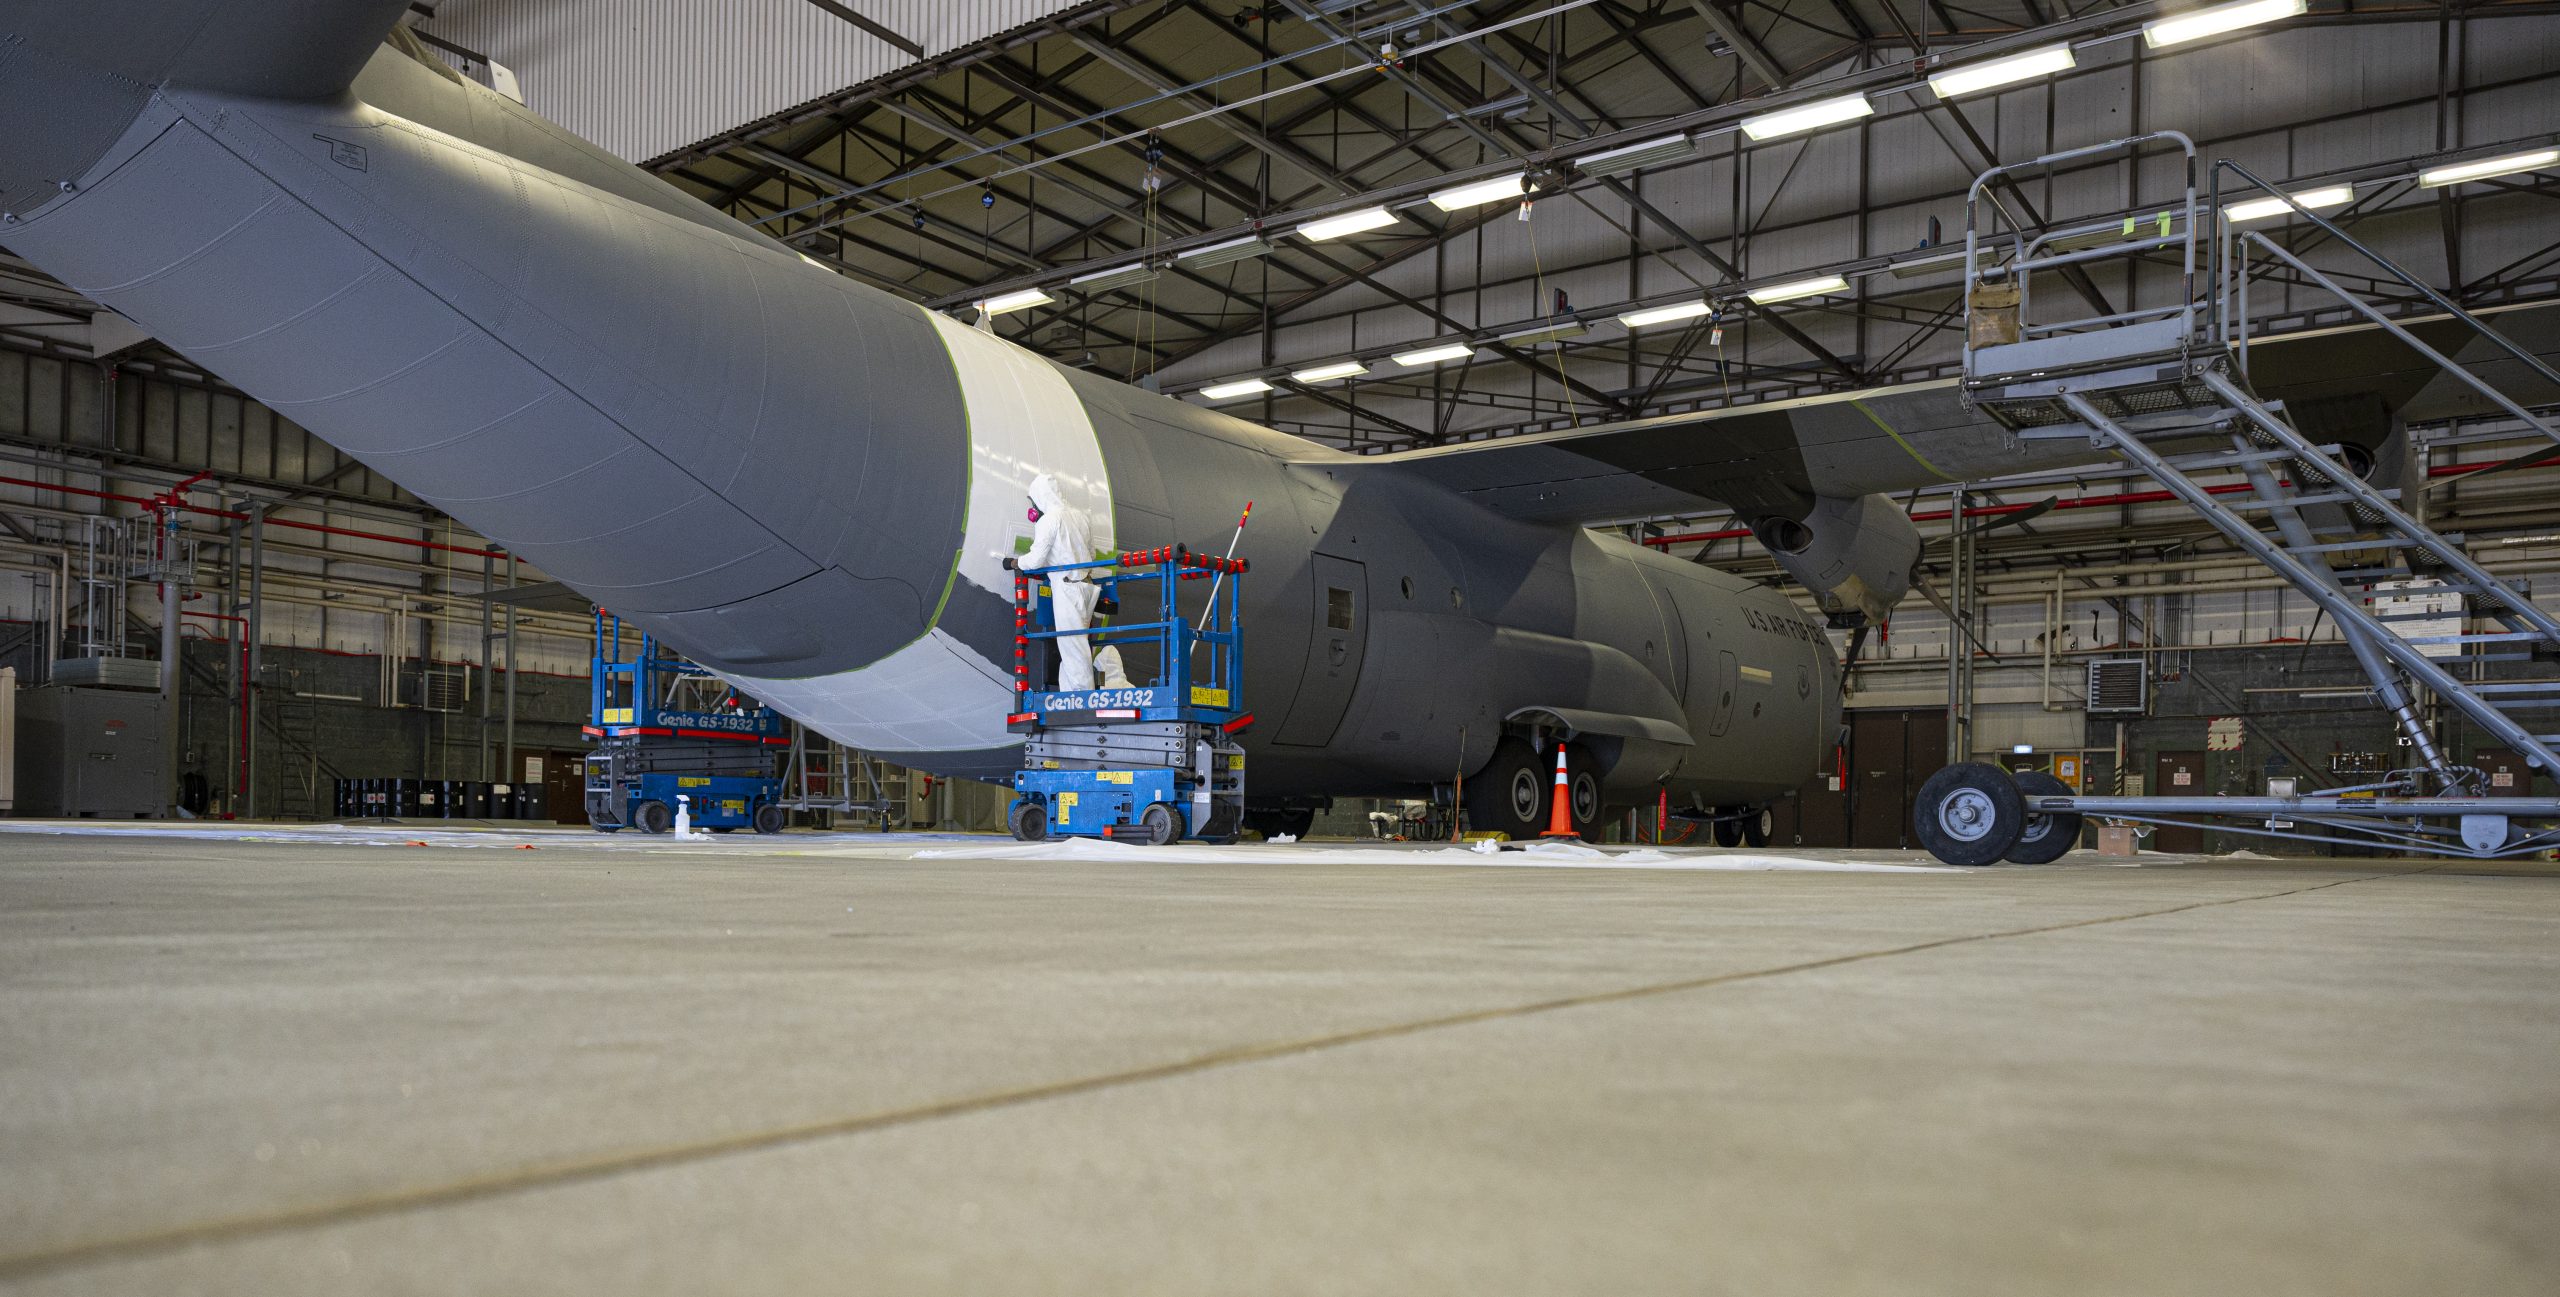 Ramstein C-130s Get Invasion Stripes For D-Day Commemoration Next Year